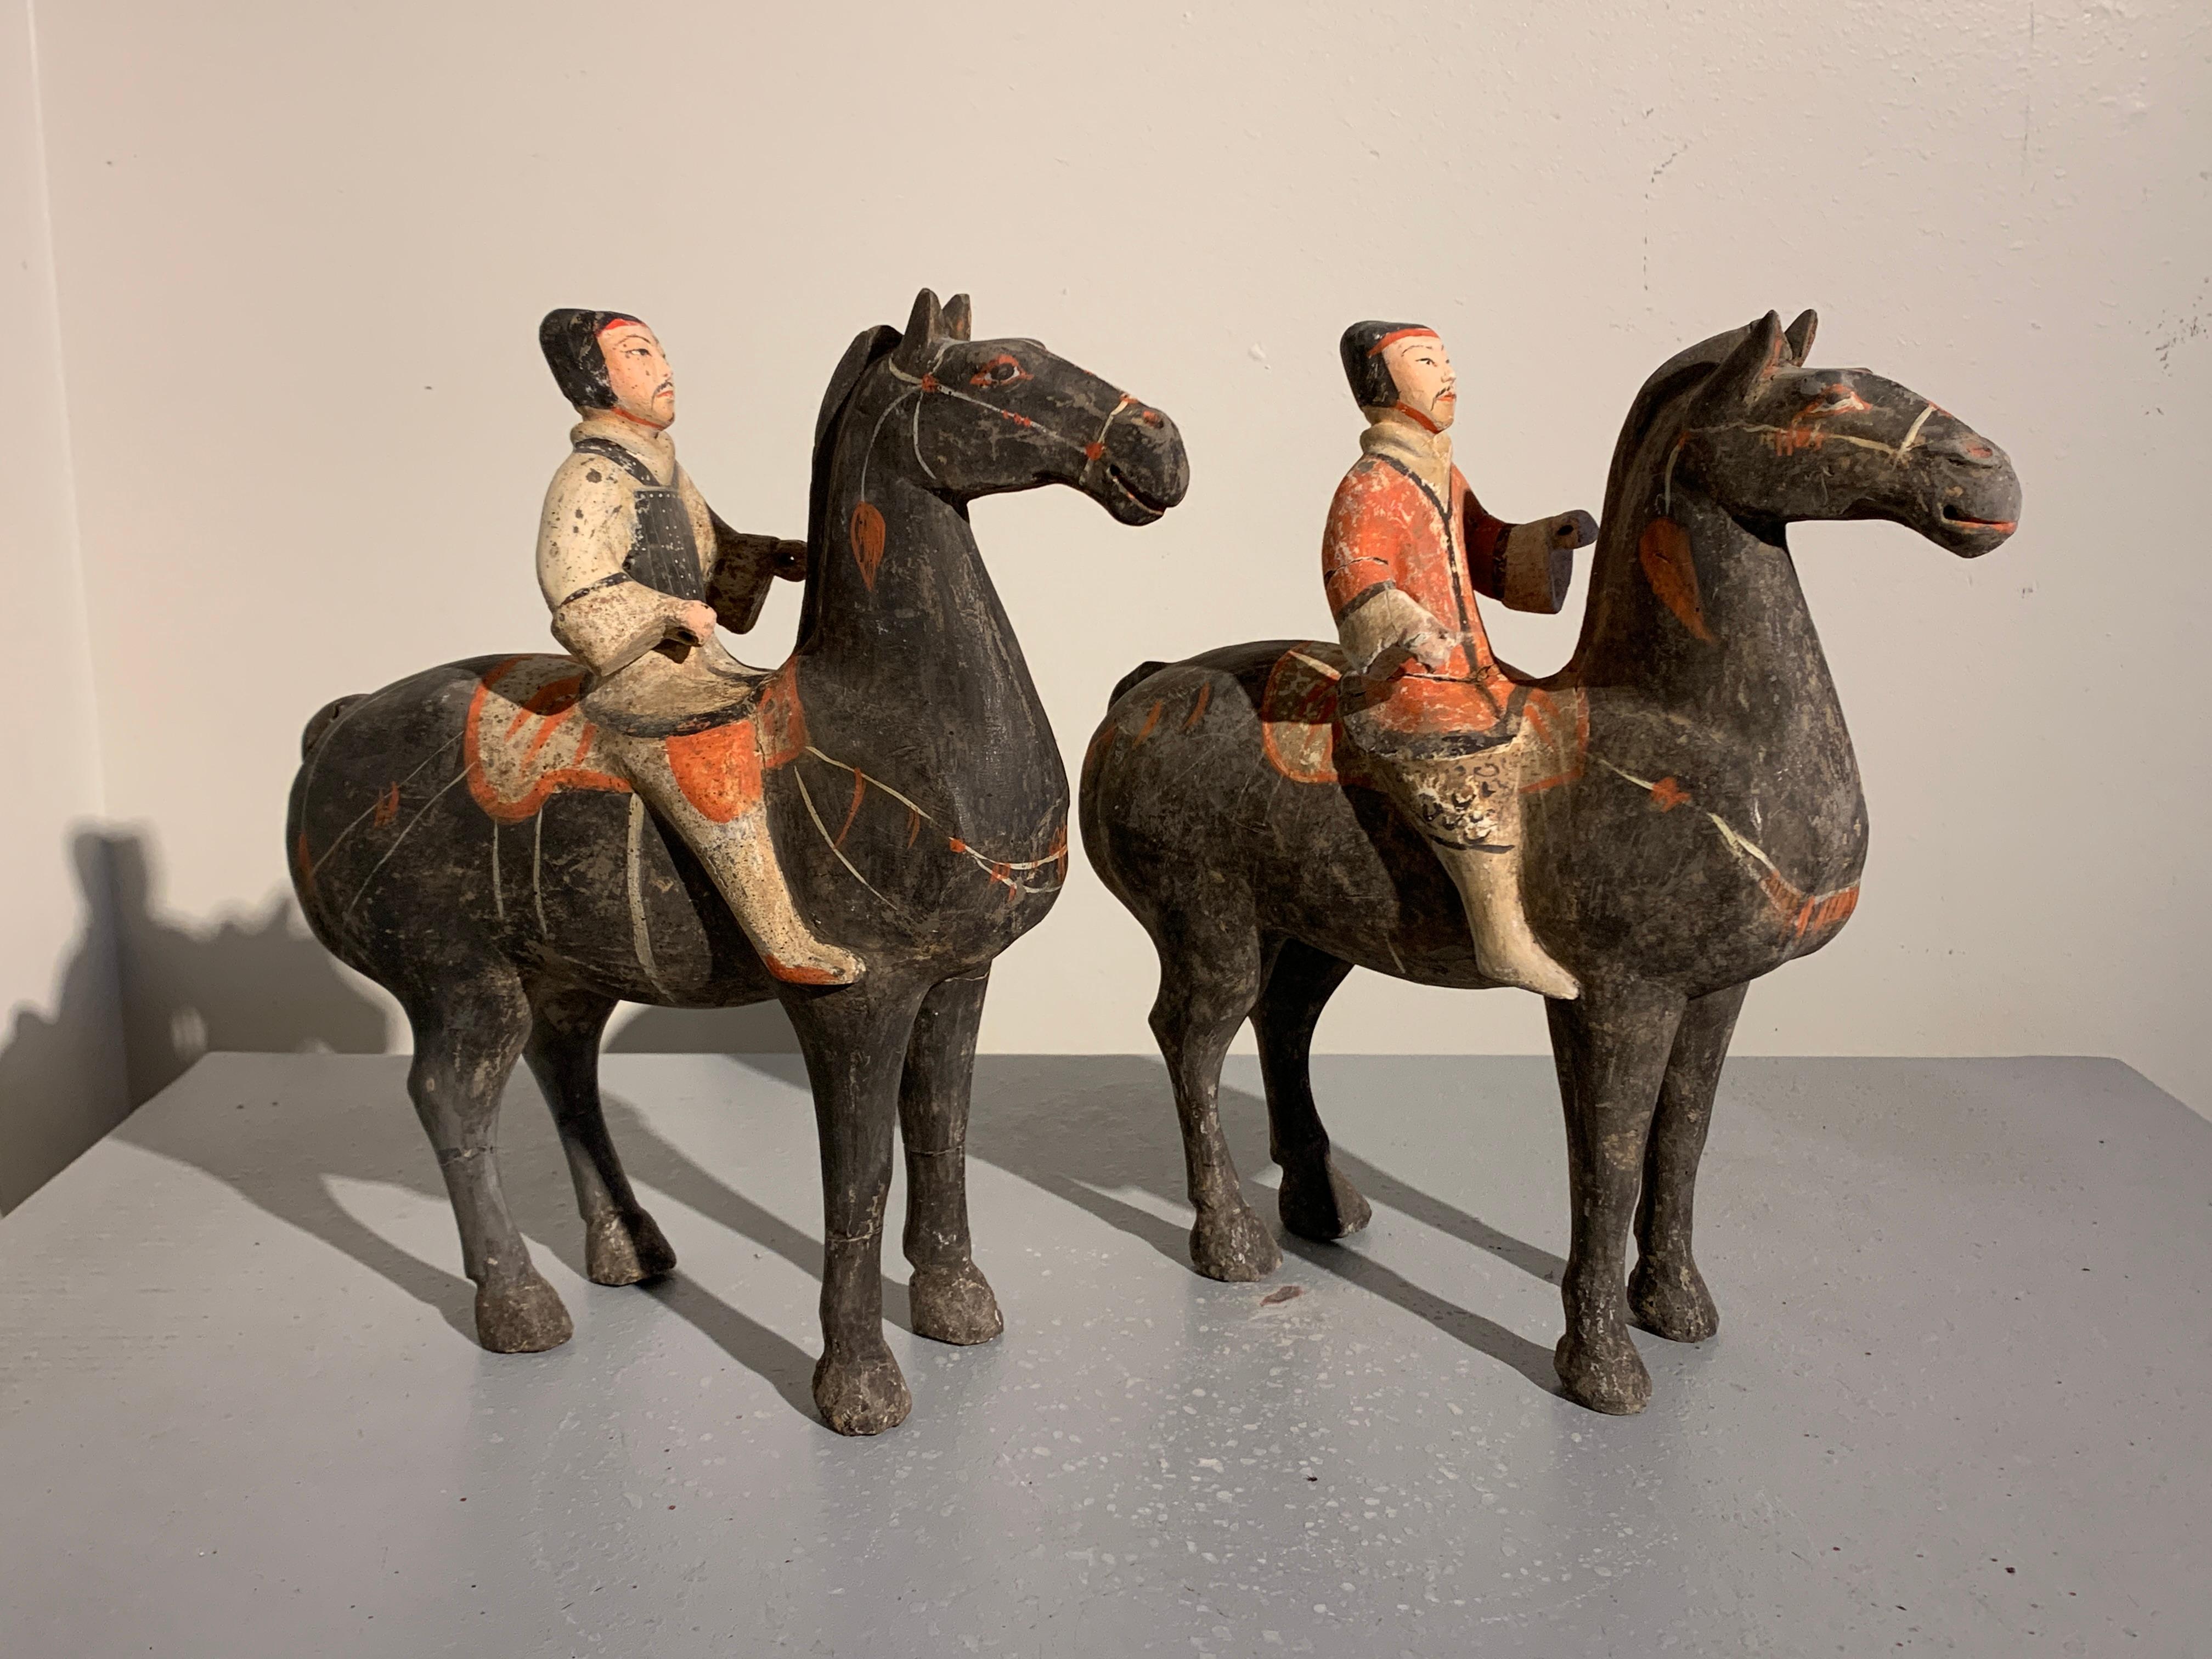 A pair of Han Dynasty (206 BC-220 AD) painted pottery horse and riders, China.

The horses modeled standing foursquare, supporting their equestrian riders. The riders dressed in military garb, one in armor, the other in loose robes with a quiver